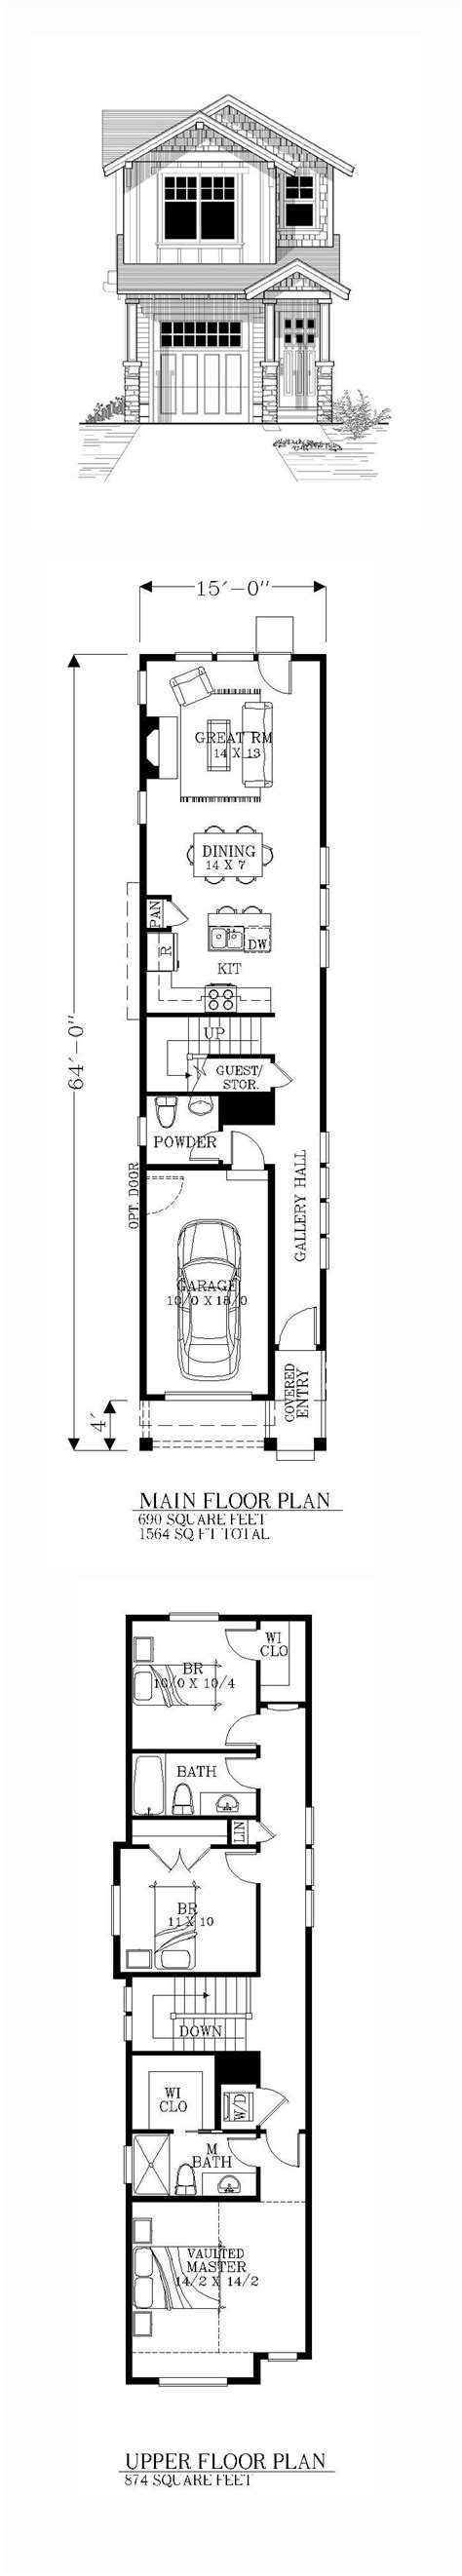 Narrow lot house plans (or house plans for narrow lots) may be more affordable to build due to the smaller lot. 49 best images about Narrow Lot Home Plans on Pinterest ...